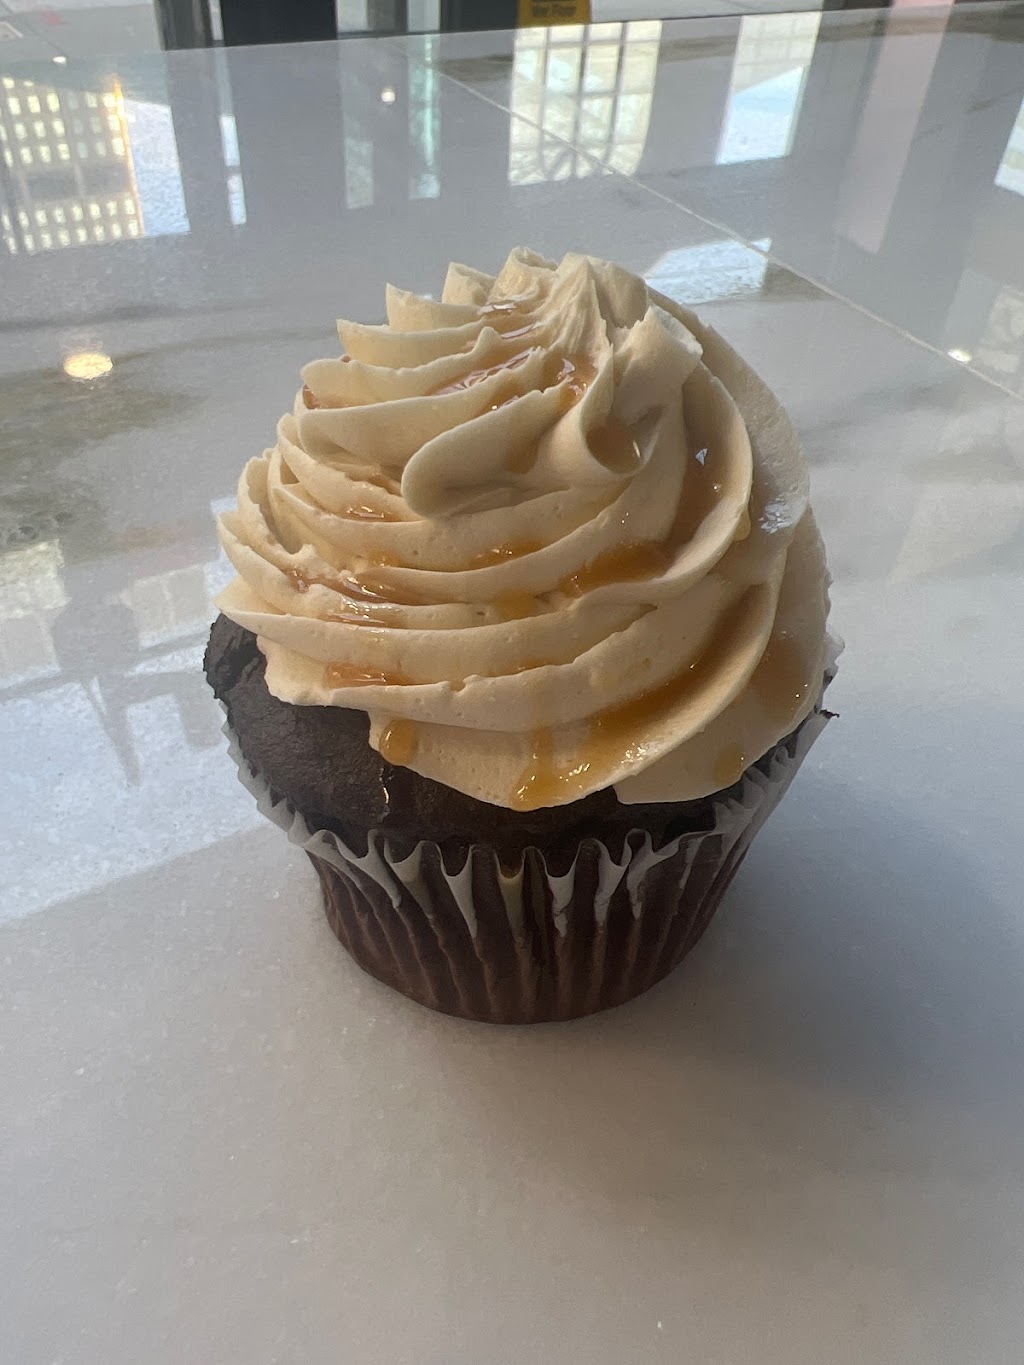 Colossal Cupcakes | bakery | Plaza between Brookpark and Lorain Ave, 4615 Great Northern Blvd, North Olmsted, OH 44070, USA | 4403857644 OR +1 440-385-7644